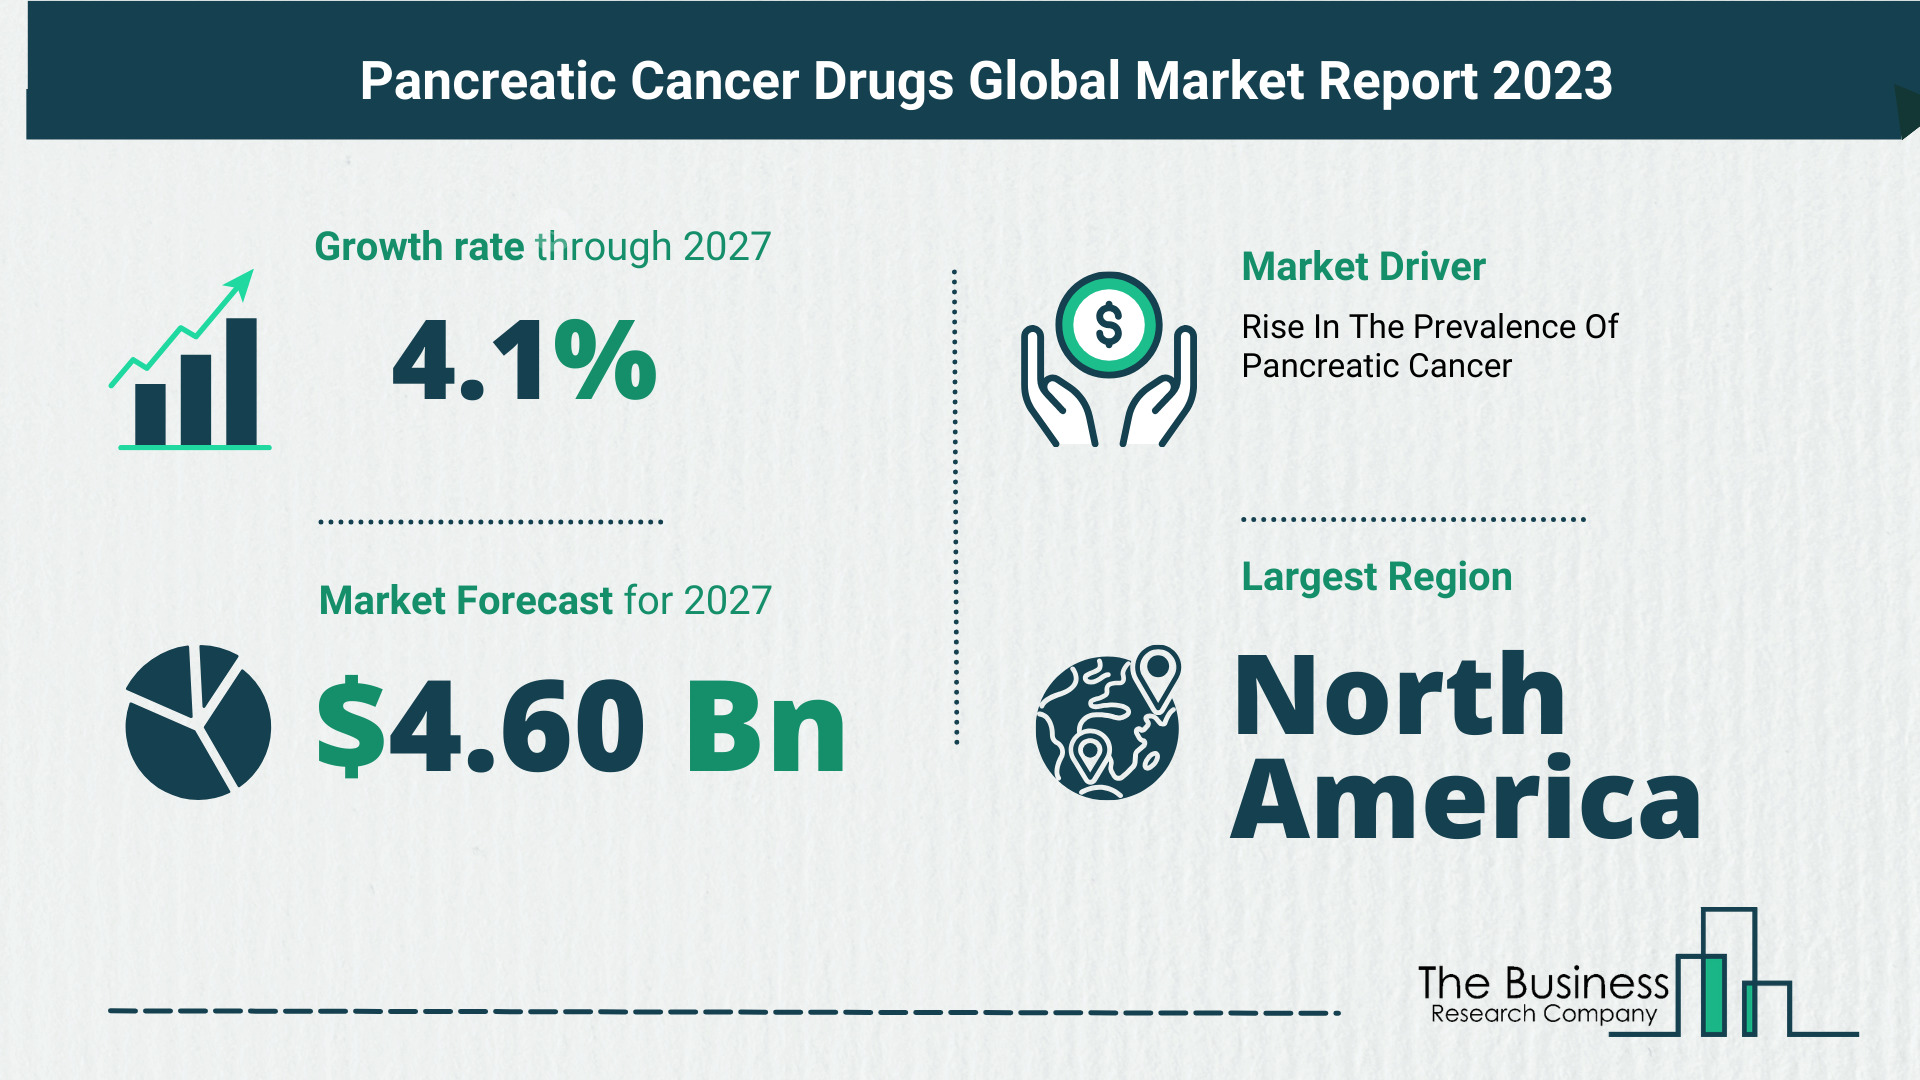 Global Pancreatic Cancer Drugs Market Analysis 2023: Size, Share, And Key Trends